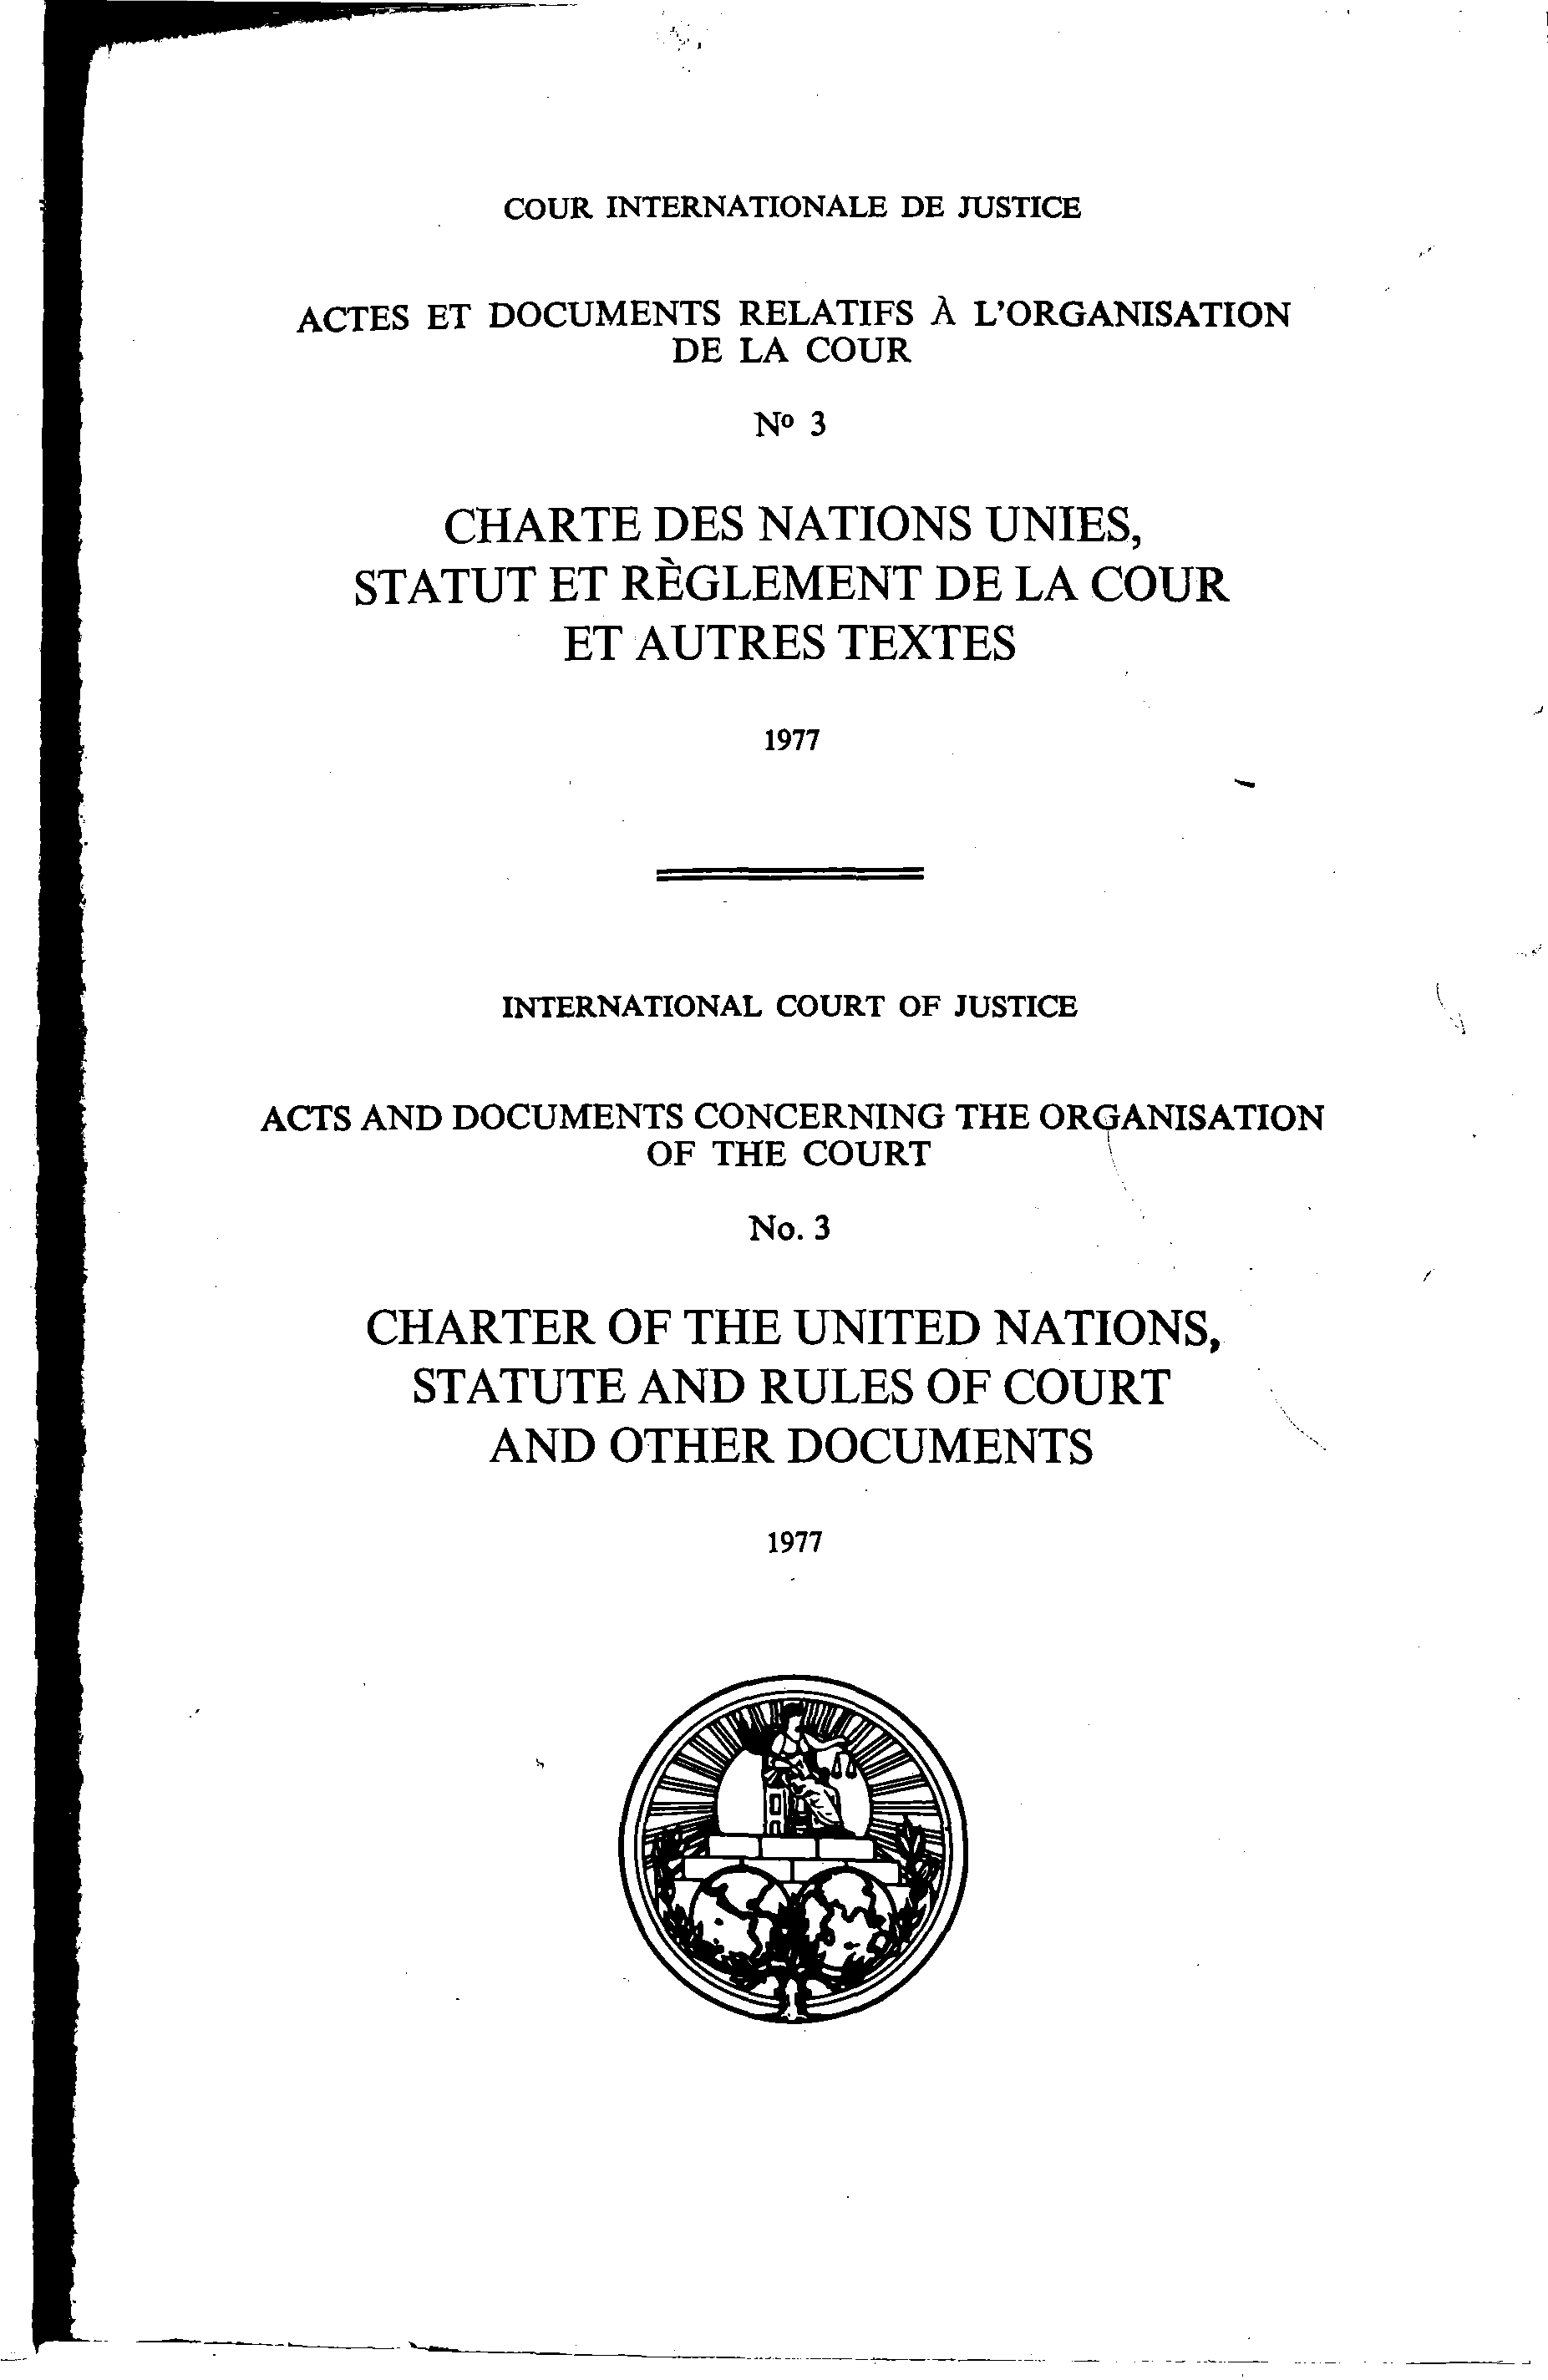 image of Acts and Documents Concerning the Organization of the Court No. 3